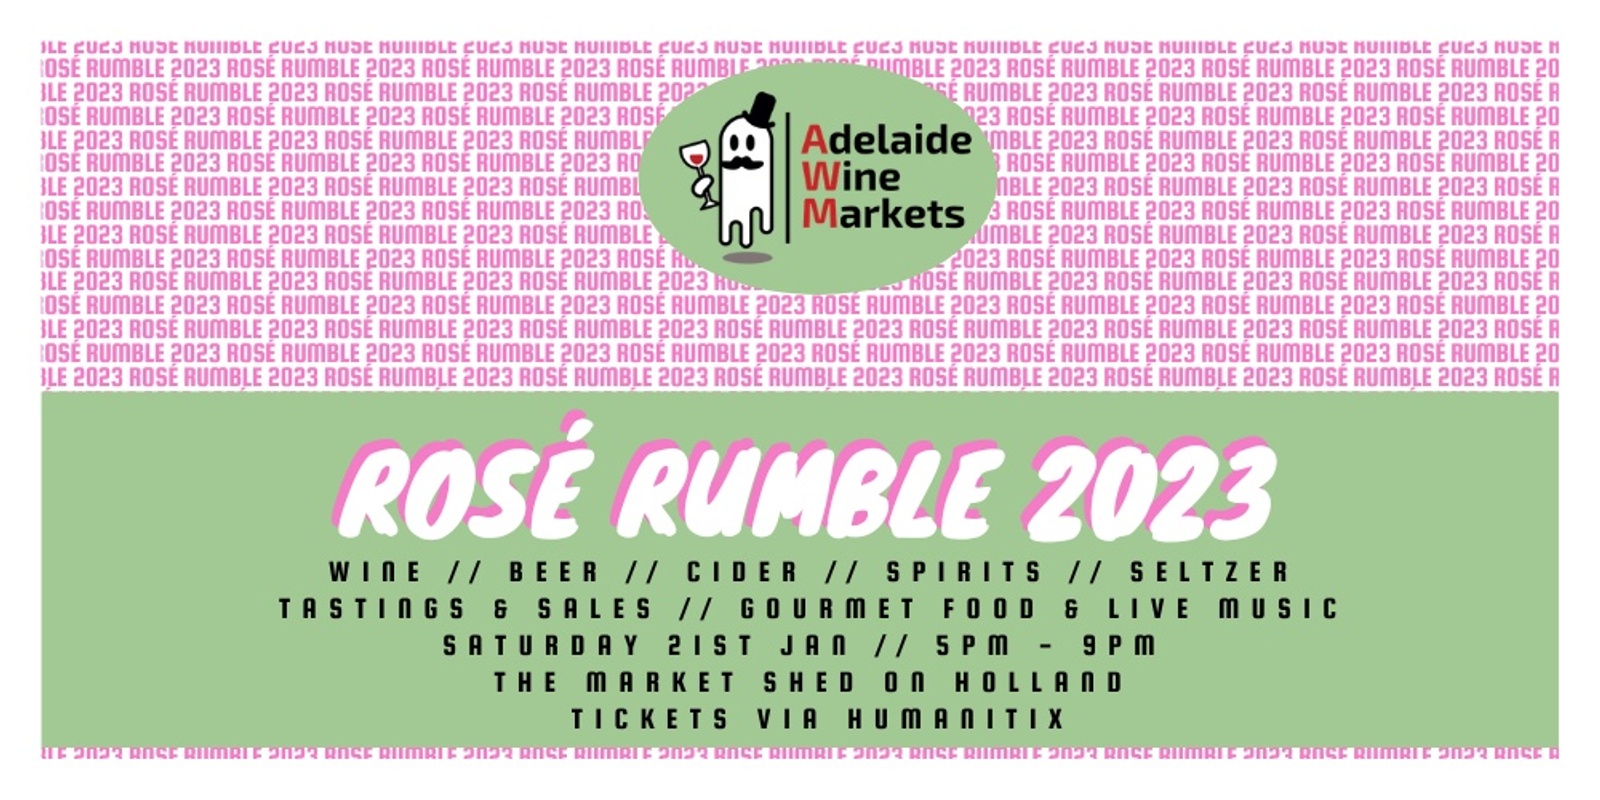 Banner image for Adelaide Wine Markets - Rosé Rumble 2023